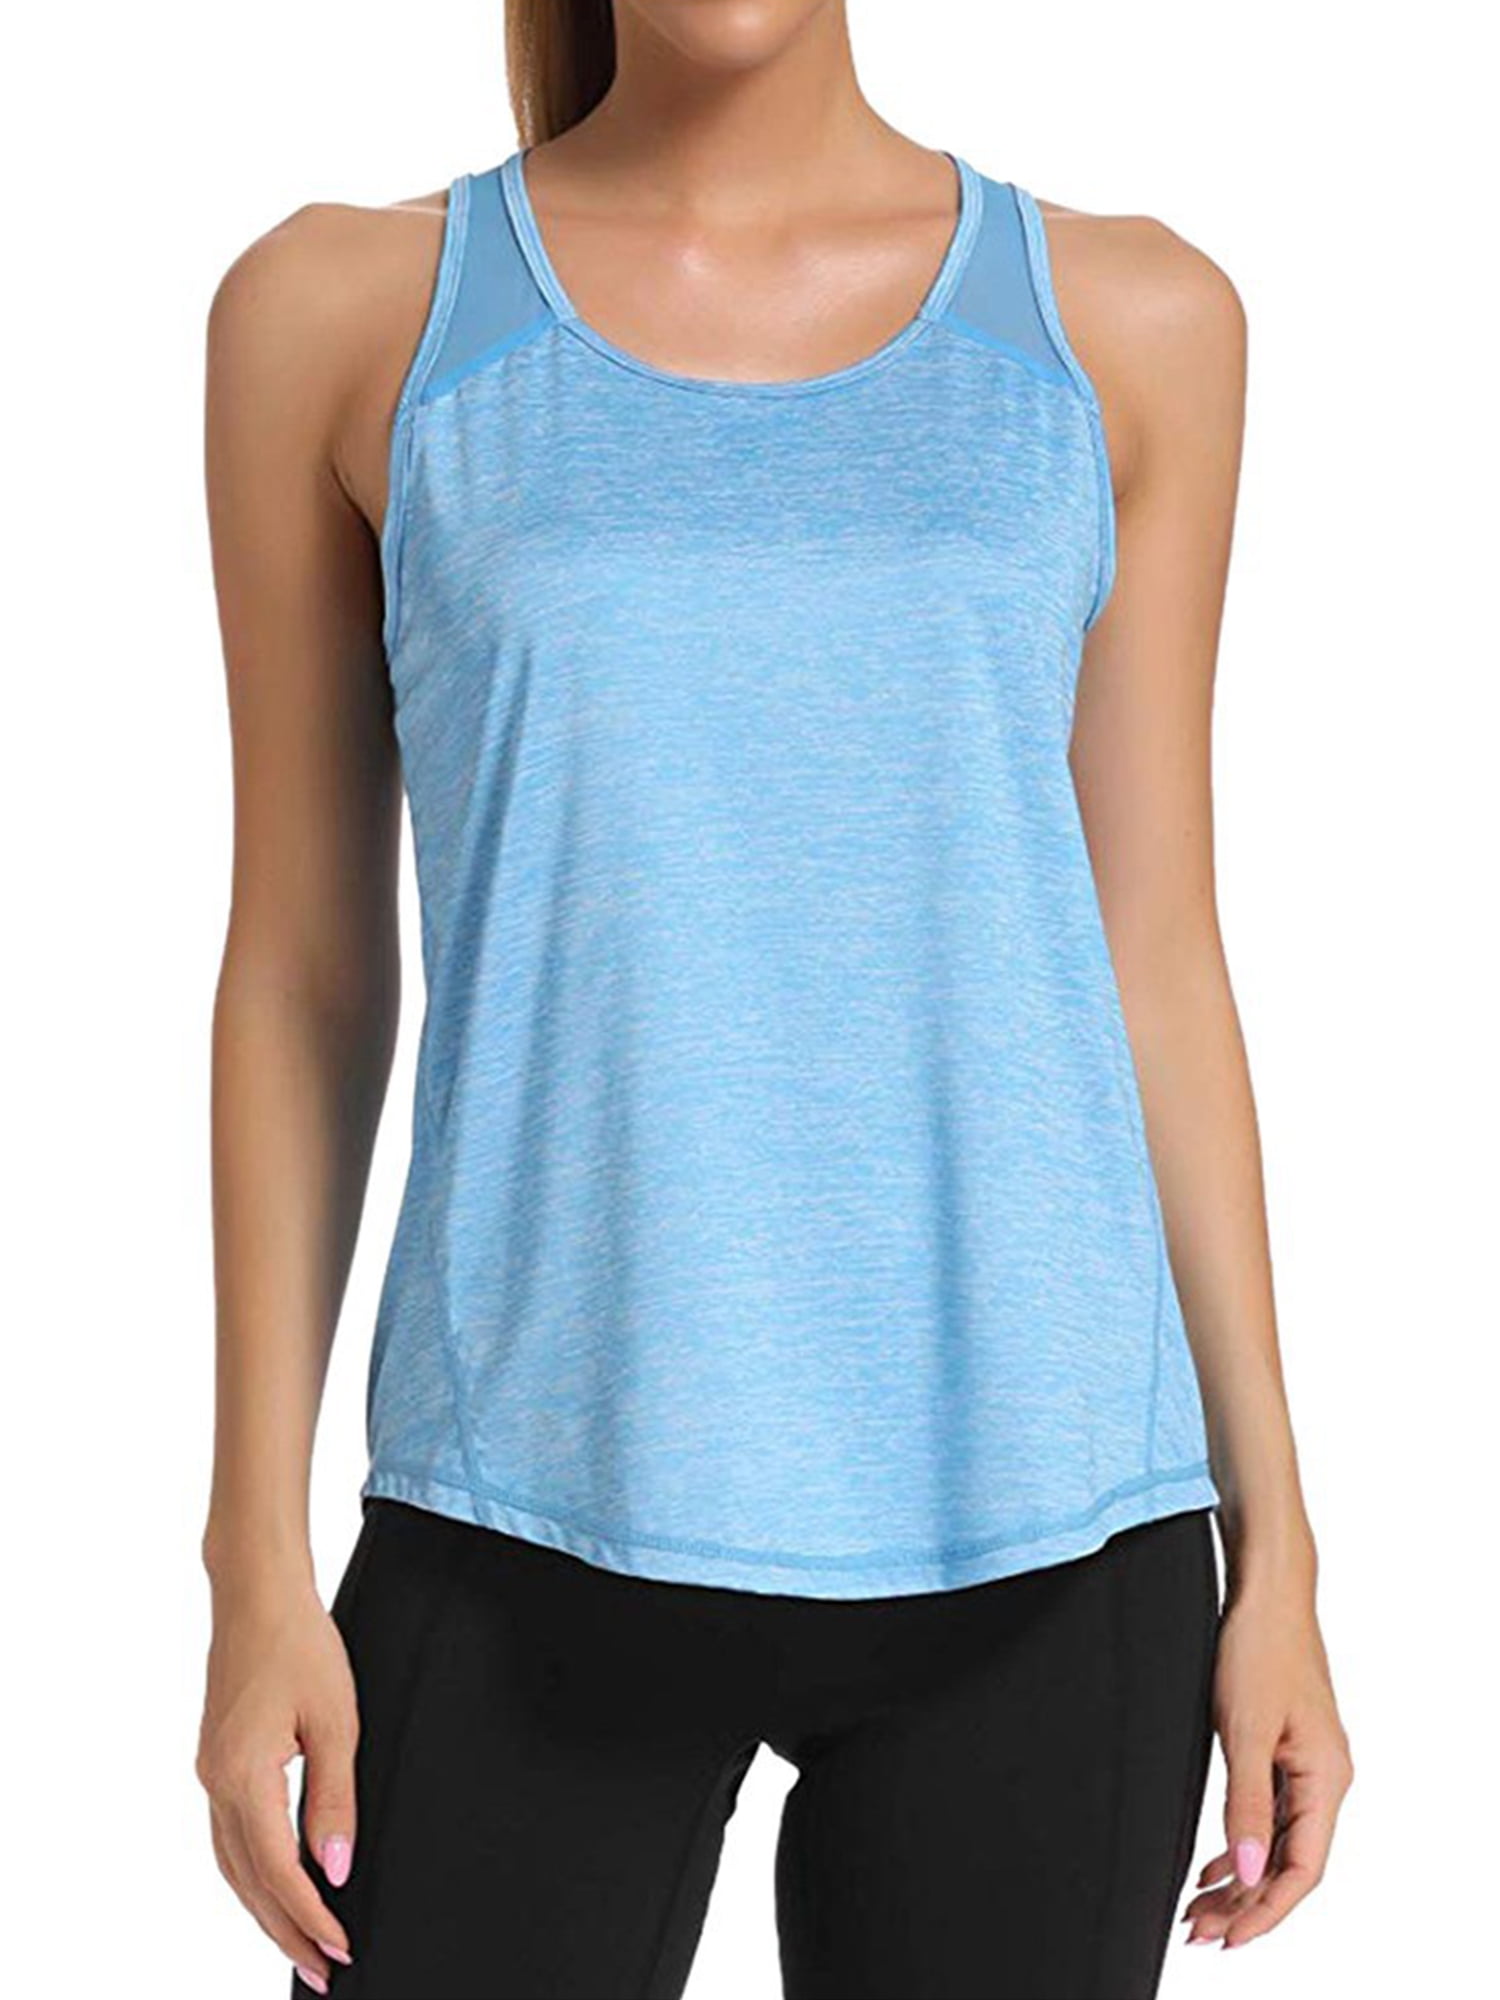 Casual Beach Tanks Loose Sports Tank Tops for Women Round Neck Sleeveless  Shirts Summer Holidays Gym Exercise Wear Womens Activewear Tees Tops 